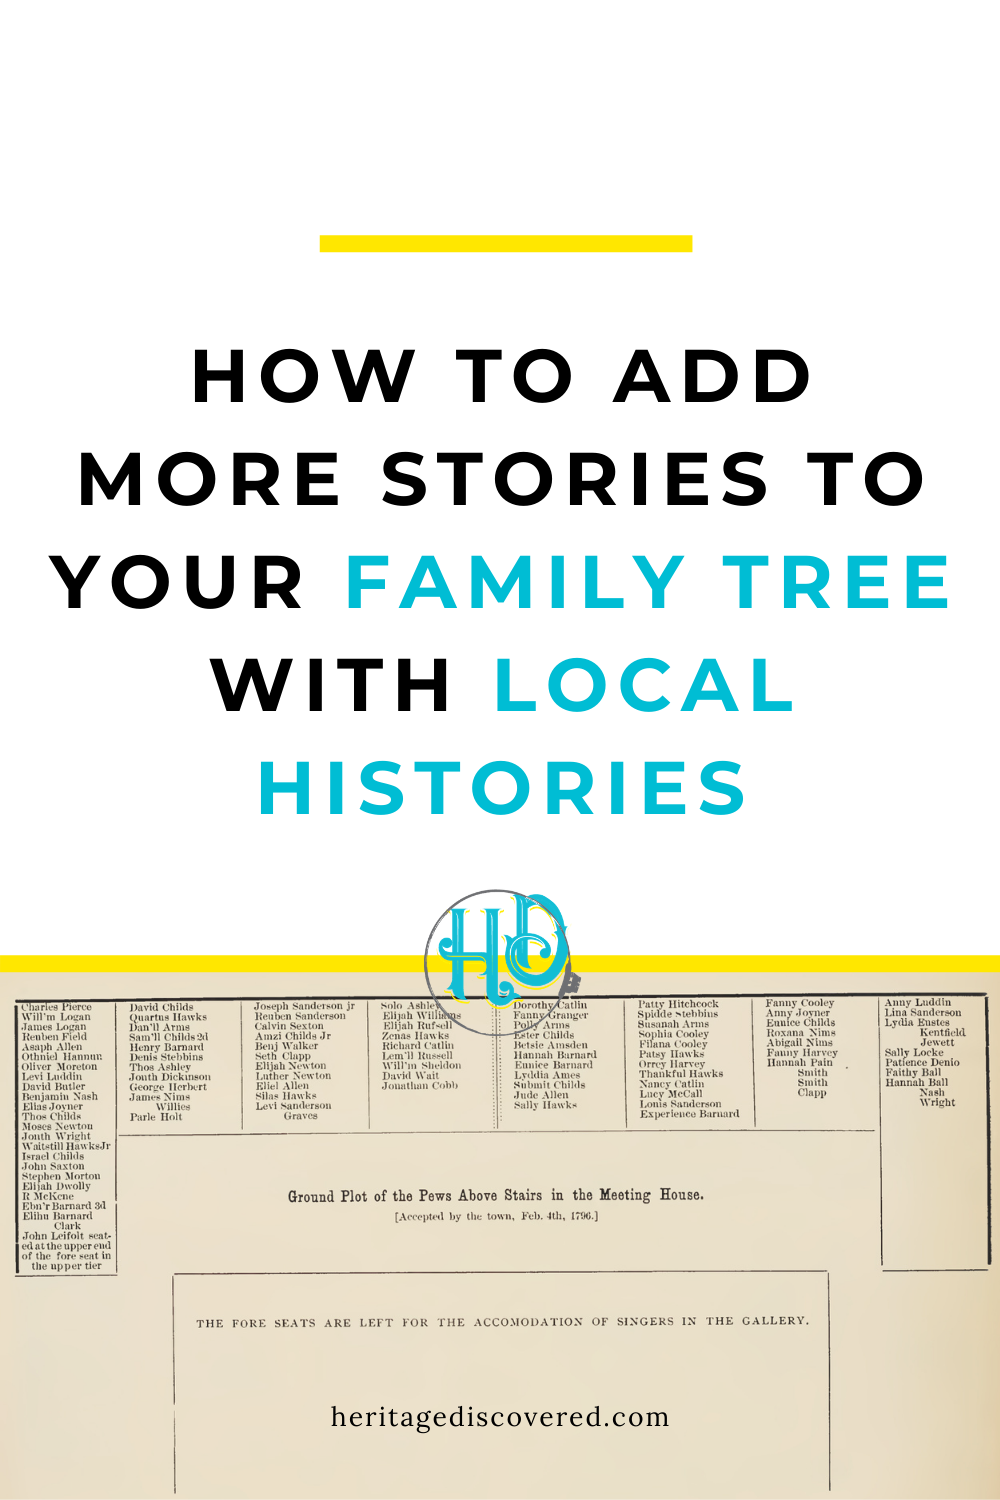 how-to-add-more-stories-to-family-tree-local-histories.png